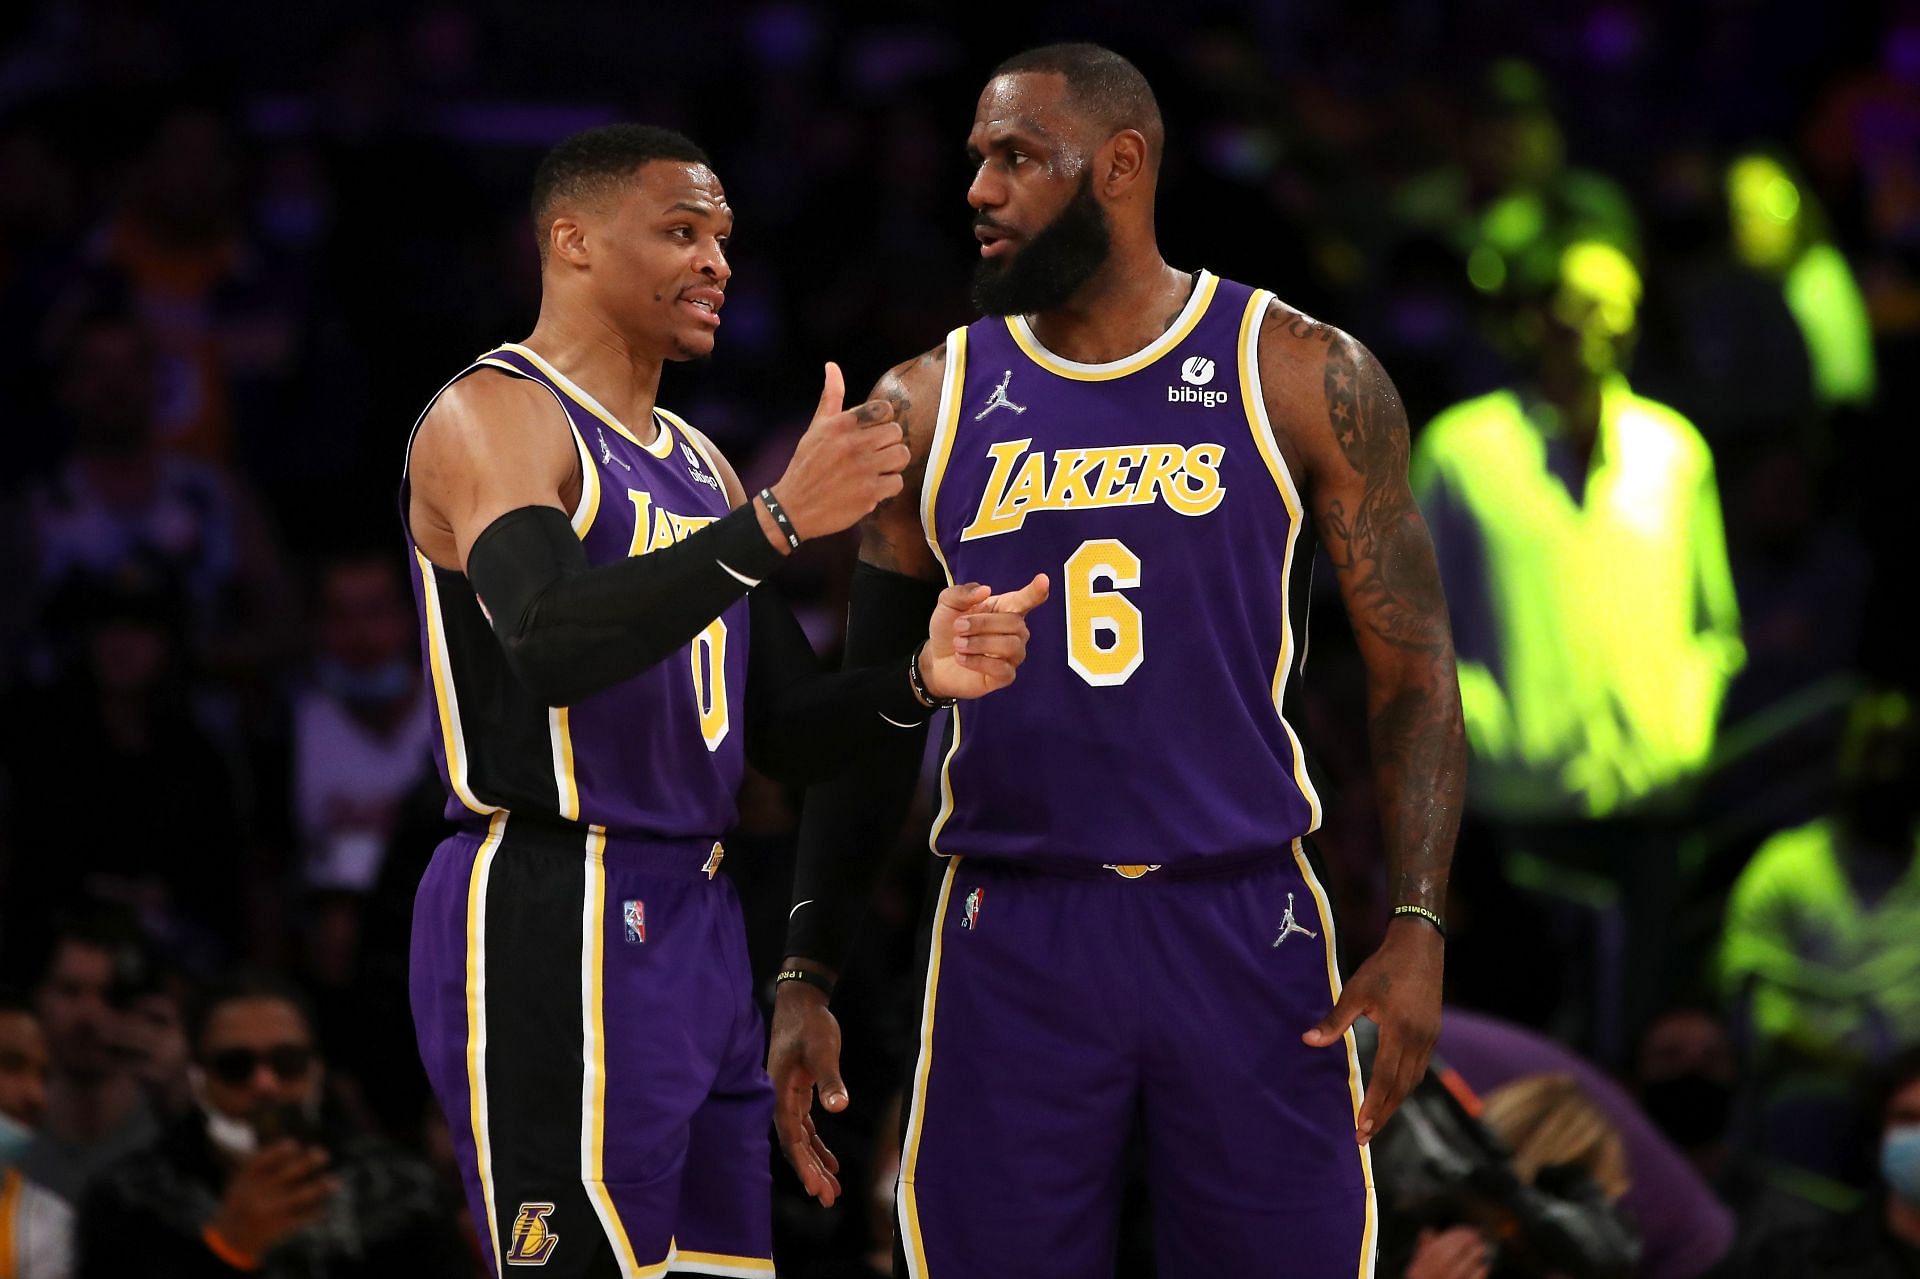 Enter caption Russell Westbrook #0 and LeBron James #6 of the LA Lakers discuss a play during the first quarter against the Utah Jazz at Crypto.com Arena on February 16, 2022 in Los Angeles, California